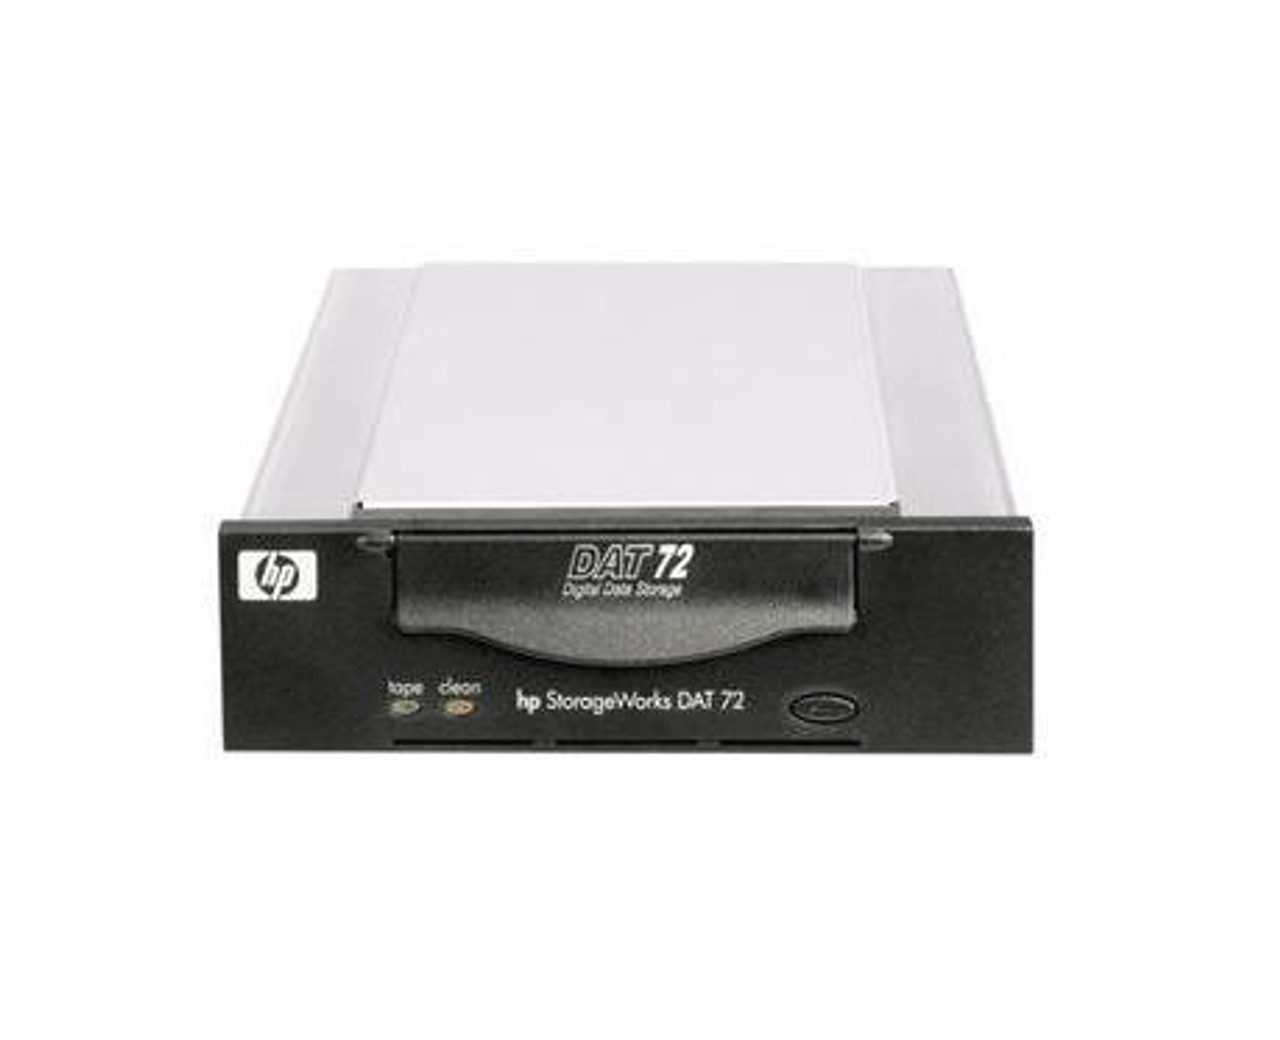 C7438-00652 - HP StorageWorks DAT-72i 36GB(Native)/72GB(Compressed) DDS-5 SCSI 68-Pin Single Ended LVD Internal Tape Drive (Carbon)